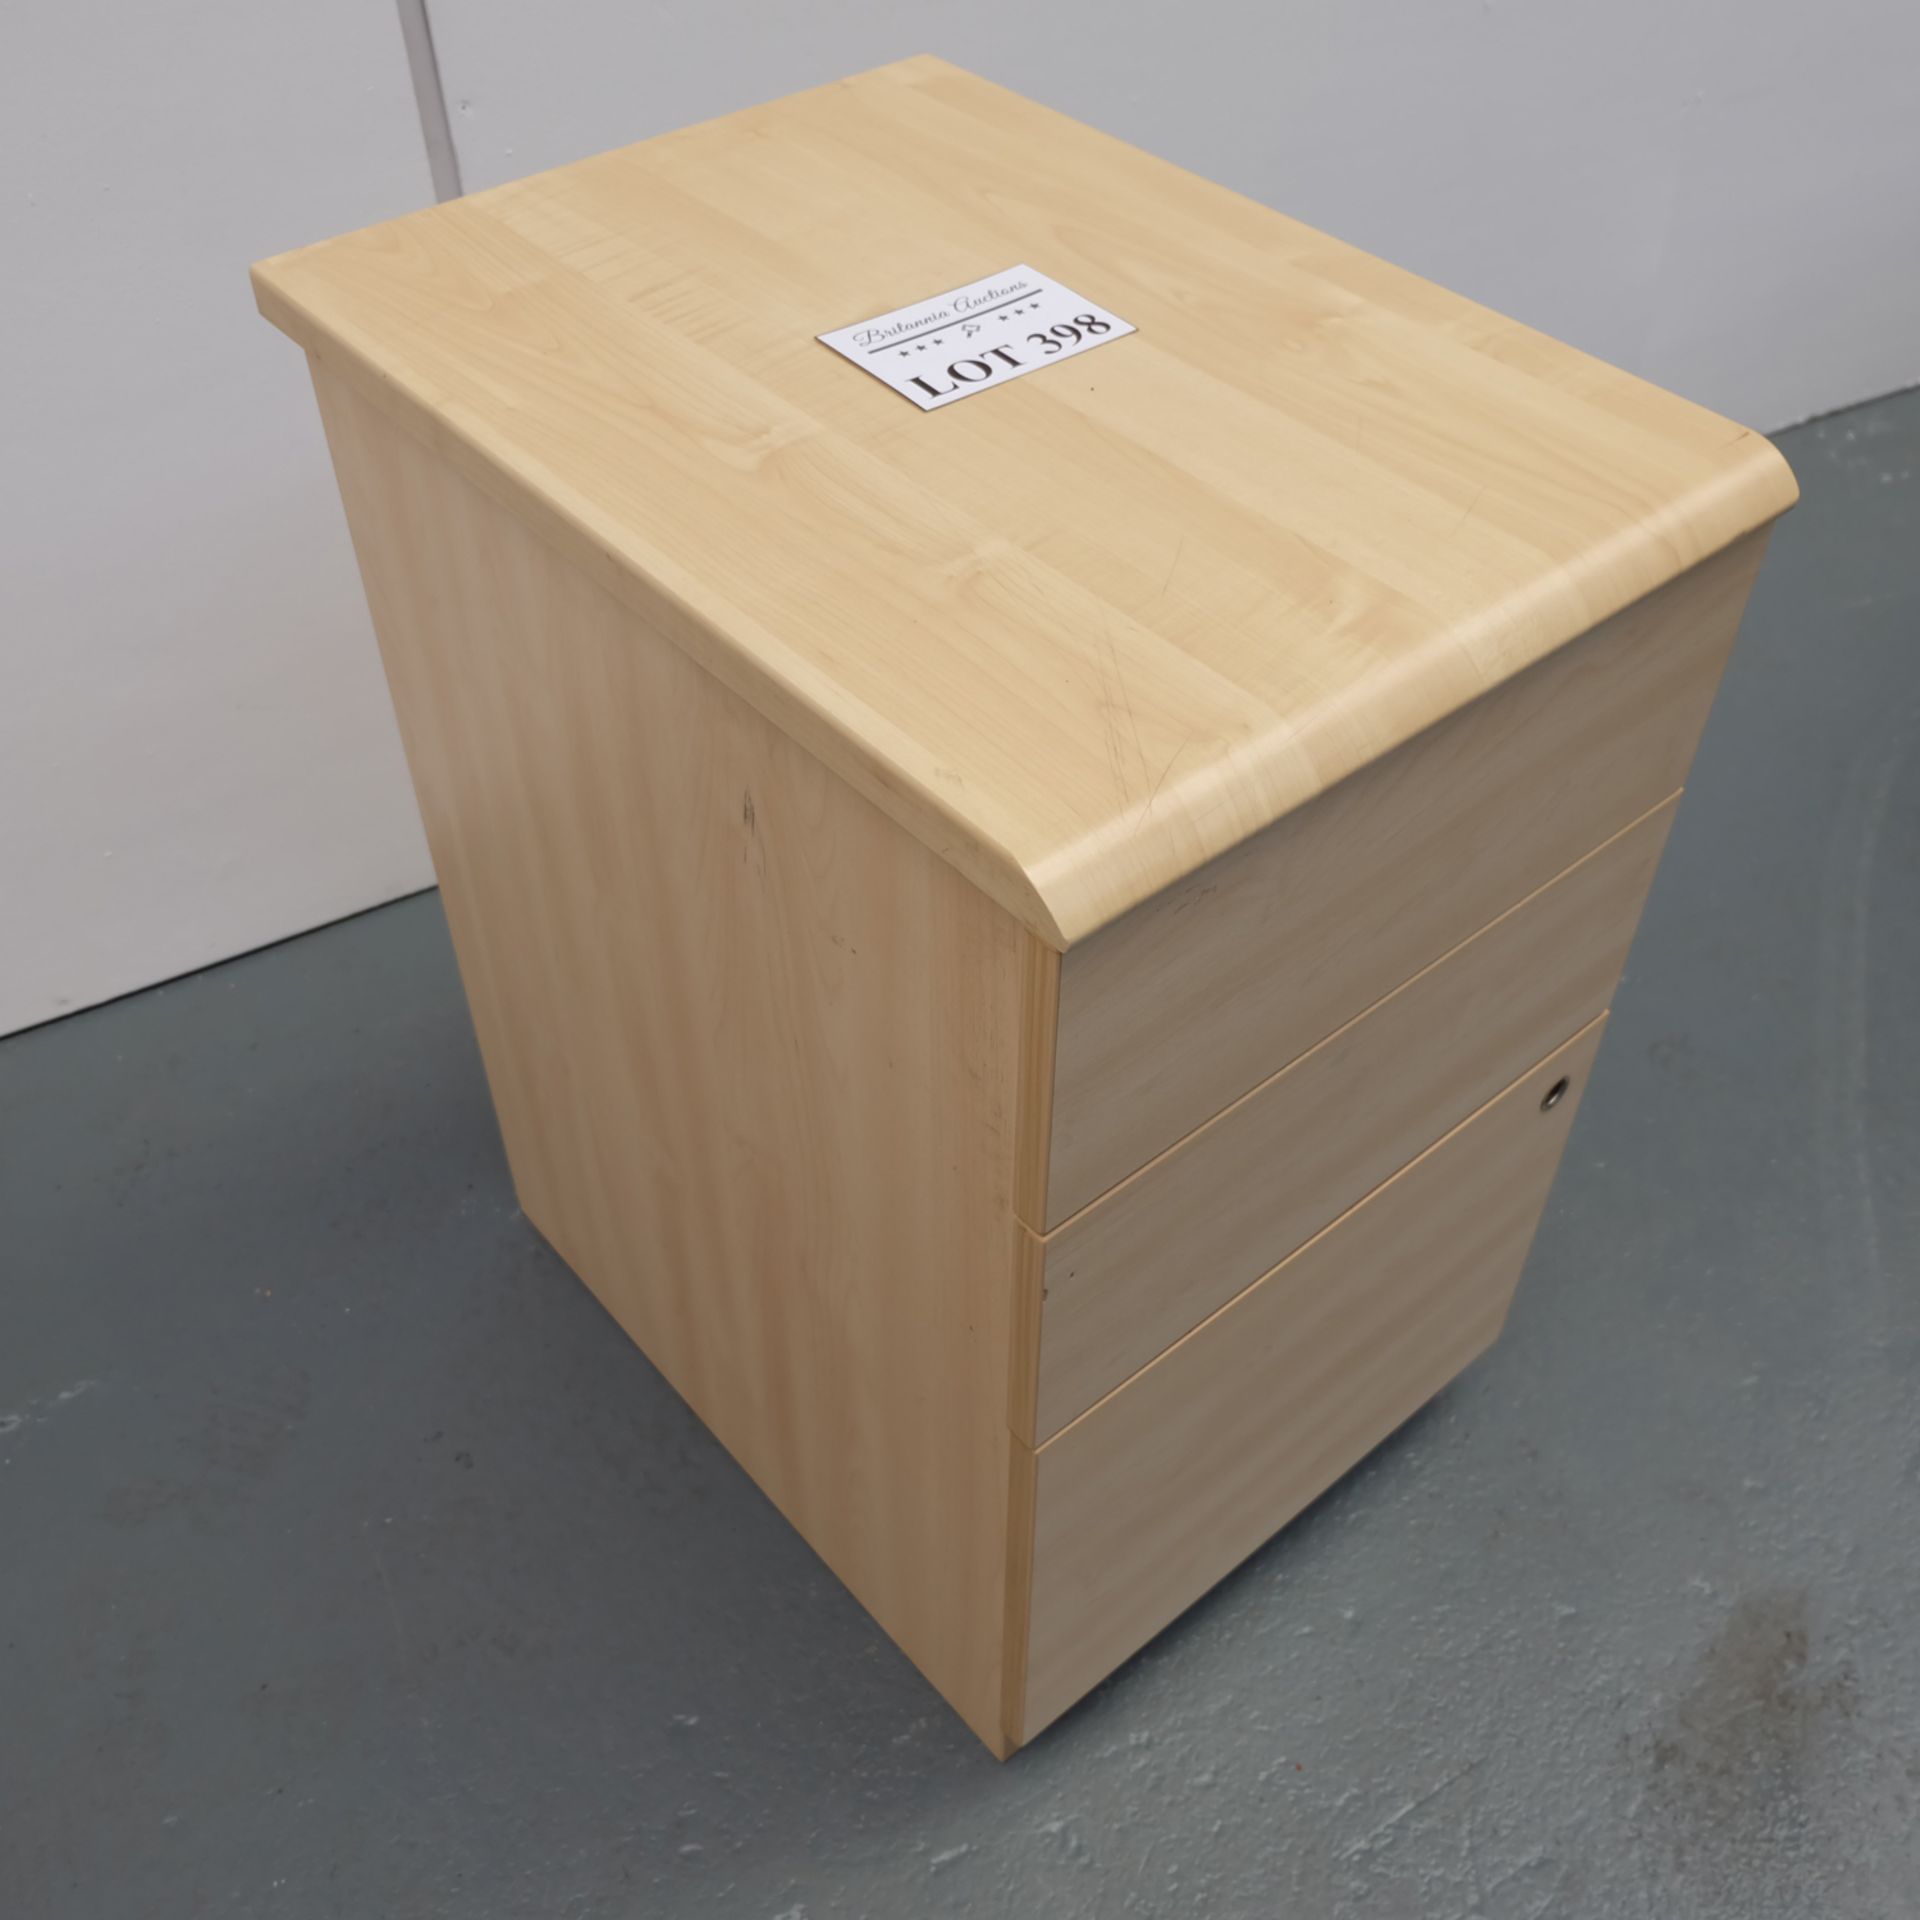 Set of Office Drawers. Dimensions 430mm x 600mm x 730mm High Approx. - Image 2 of 6